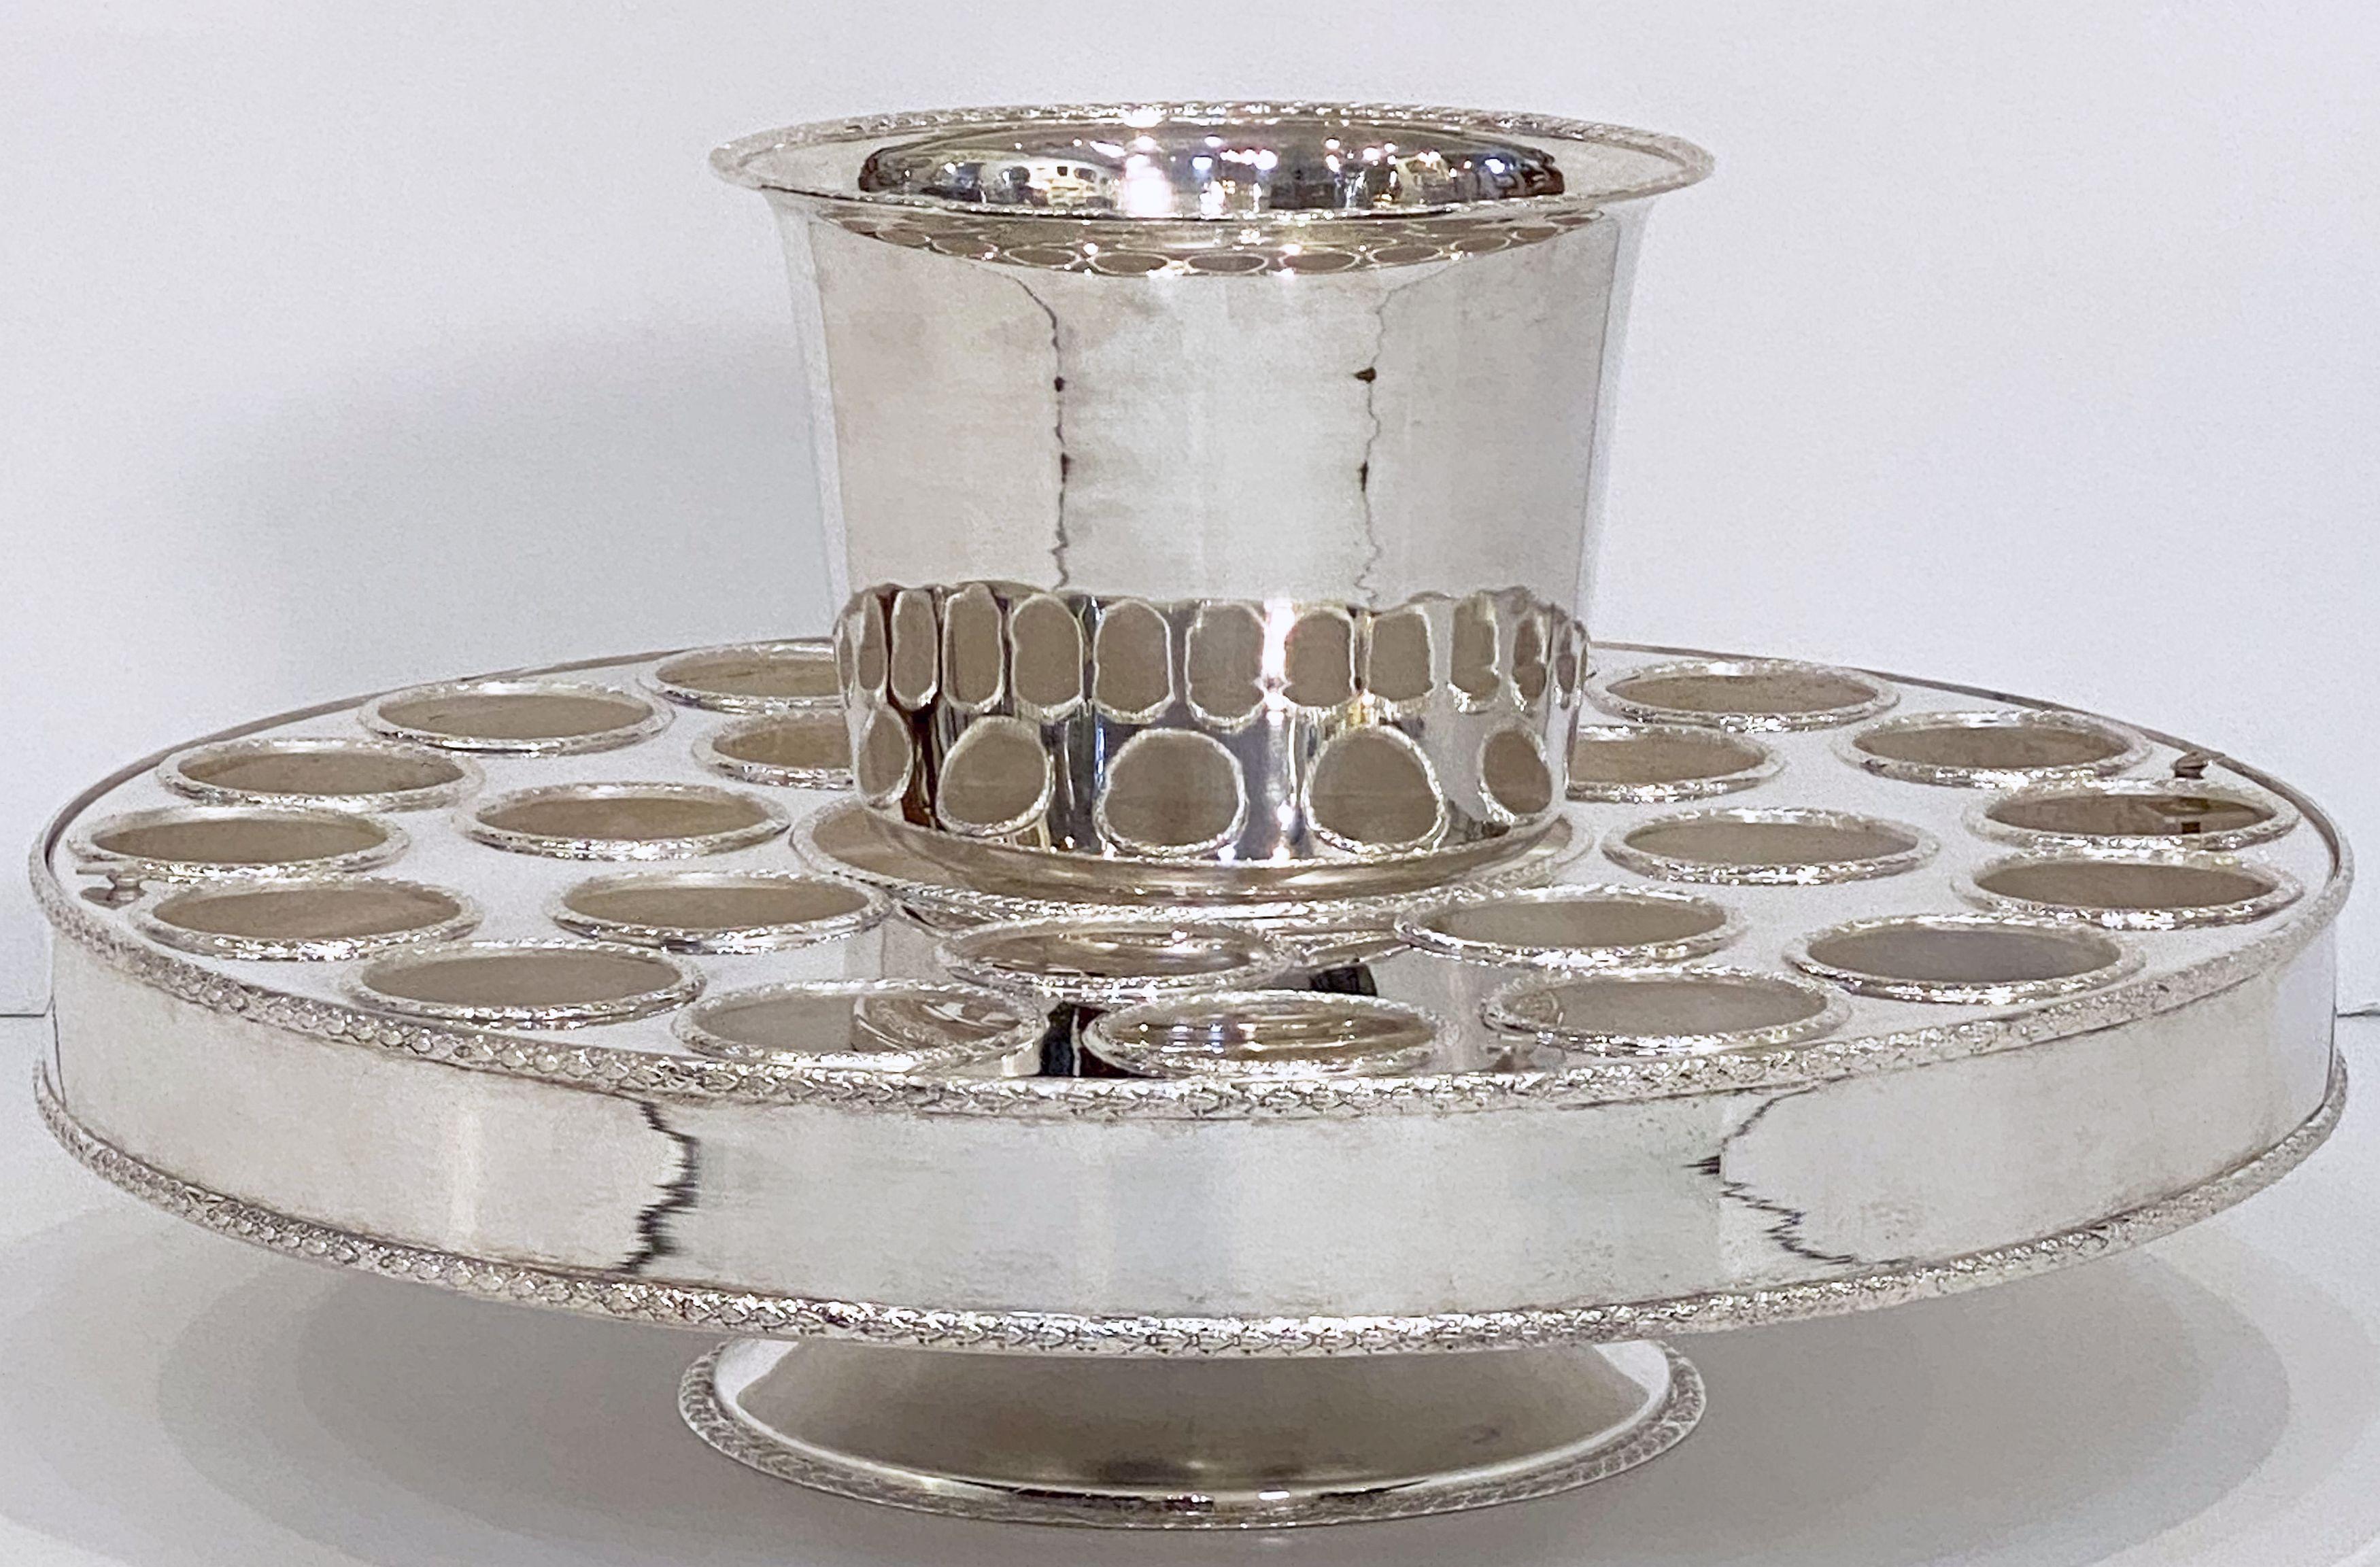 A beautiful Italian champagne service or presentation centerpiece, featuring a round revolving stand (or lazy susan) of fine plate silver, with fitted spaces for holding twenty-four champagne flutes and a removable champagne or wine cooler in the